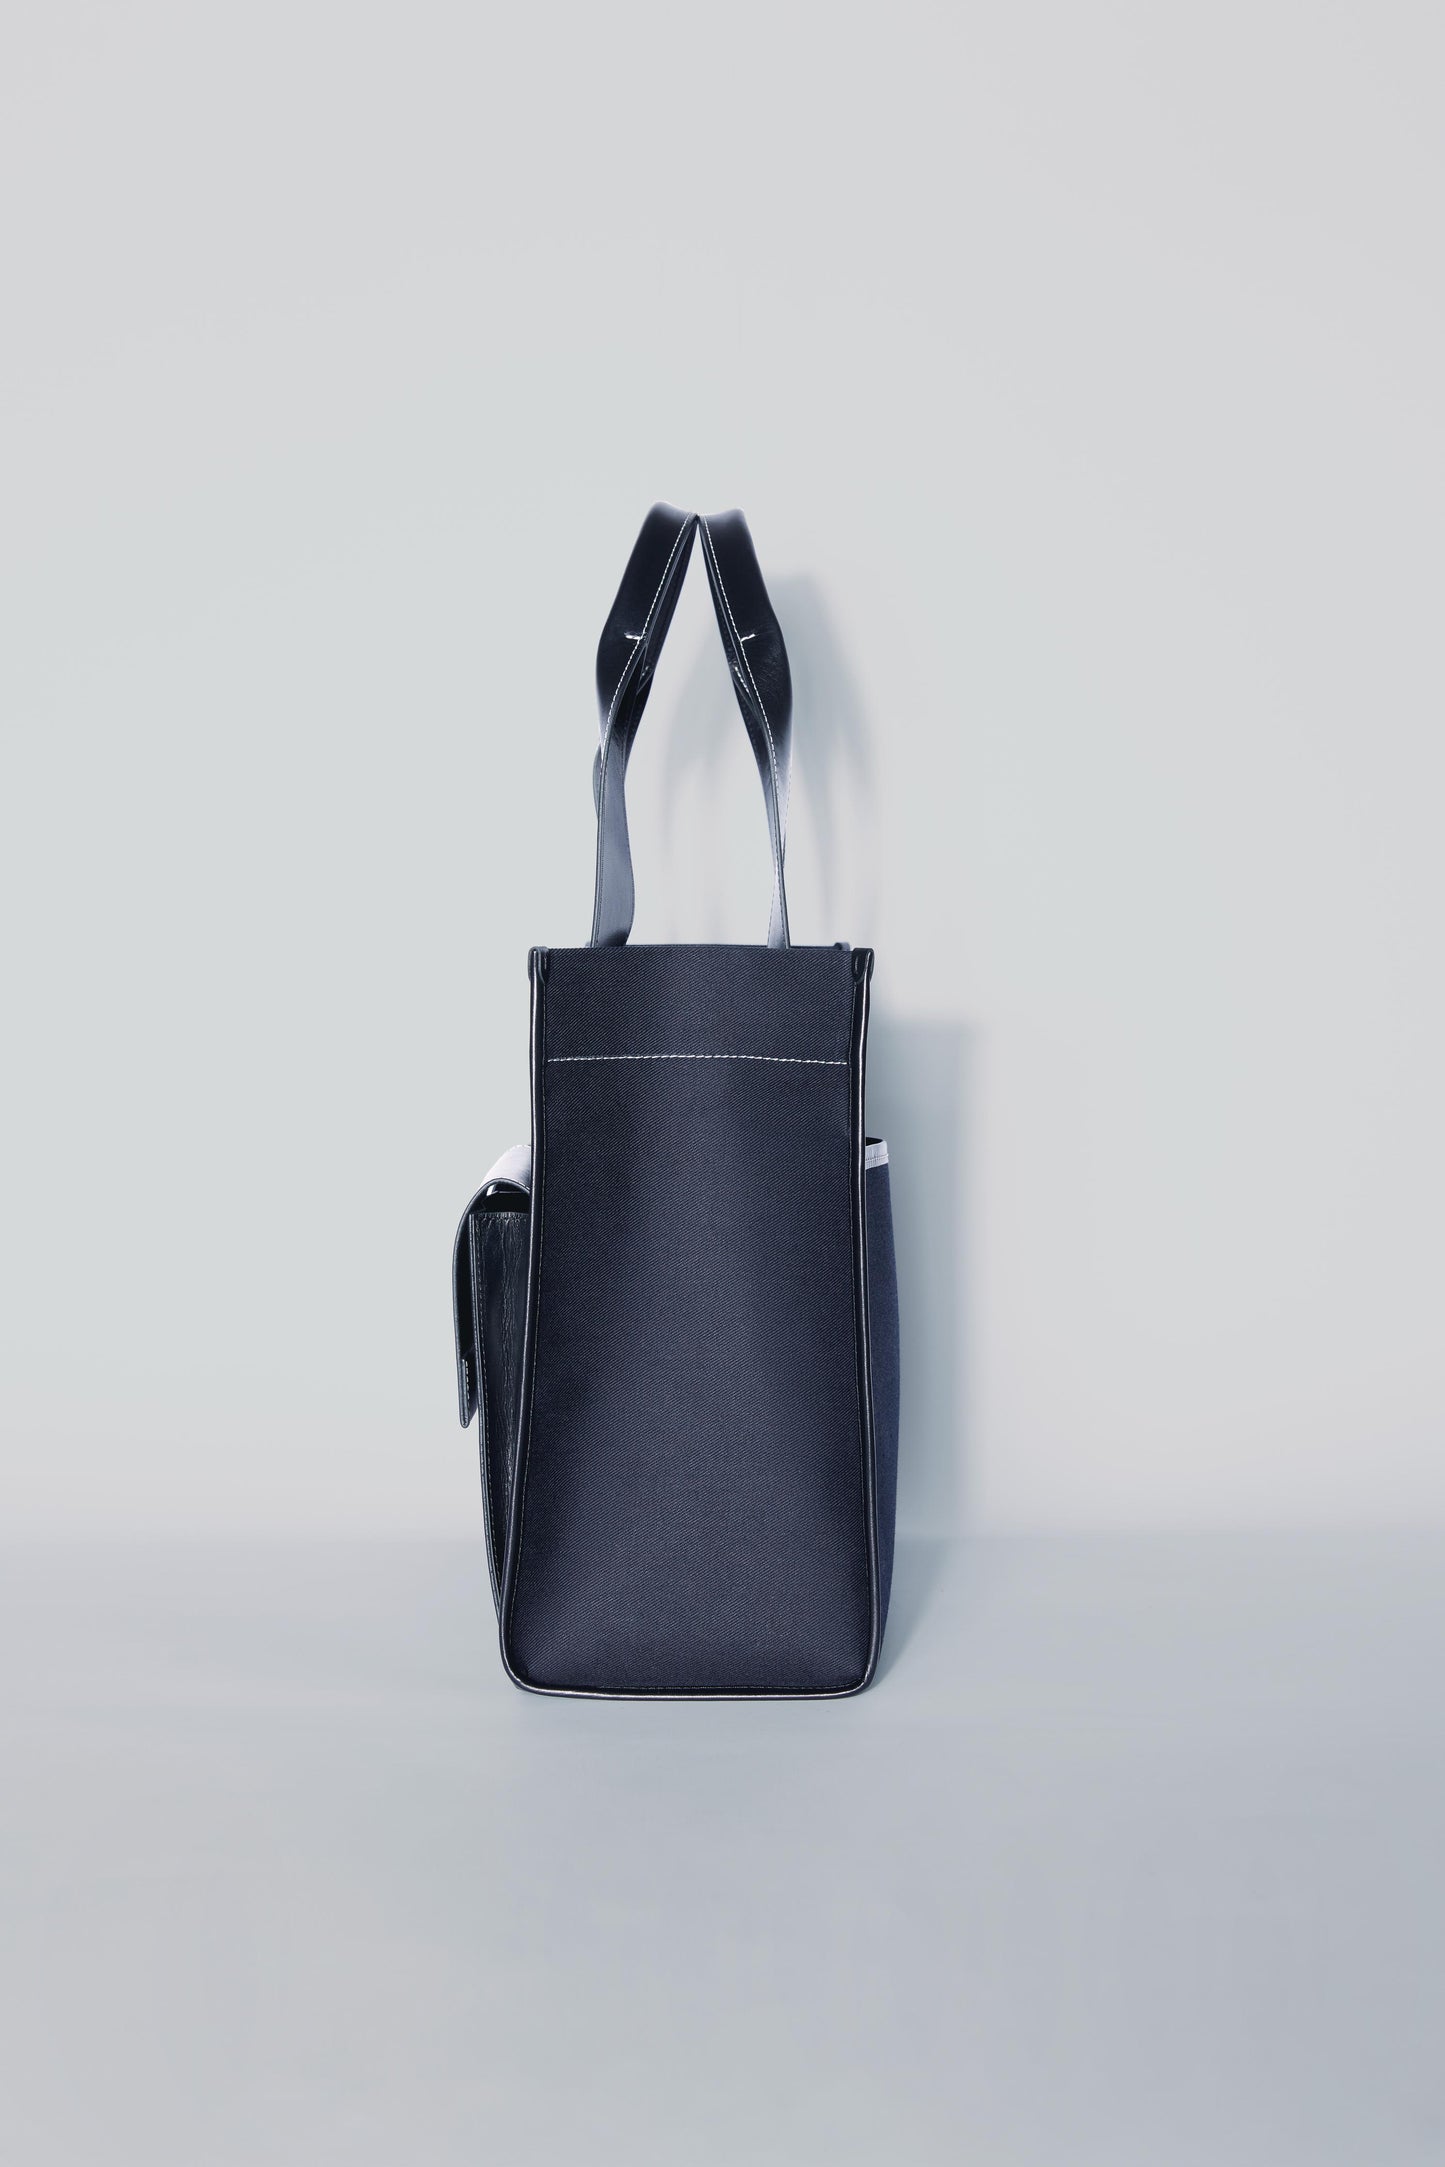 STITCHED POCKET MAXI TOTE BAG IN NAVY AND BLACK